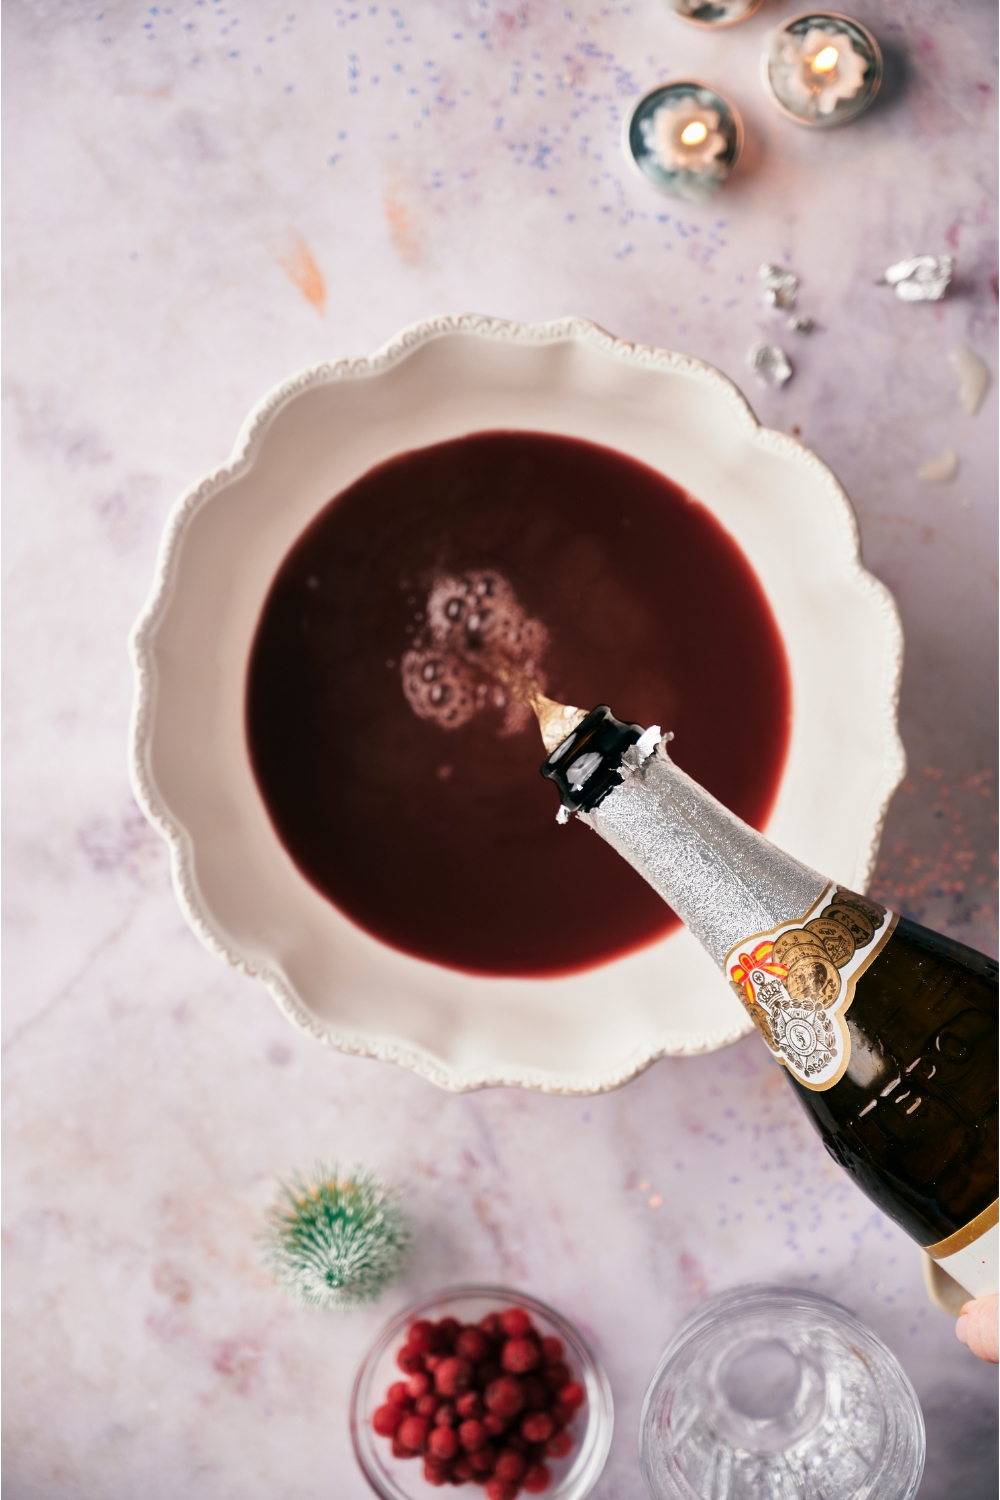 A bottle of sparkling juice being poured into a punchbowl filled with cranberry juice.